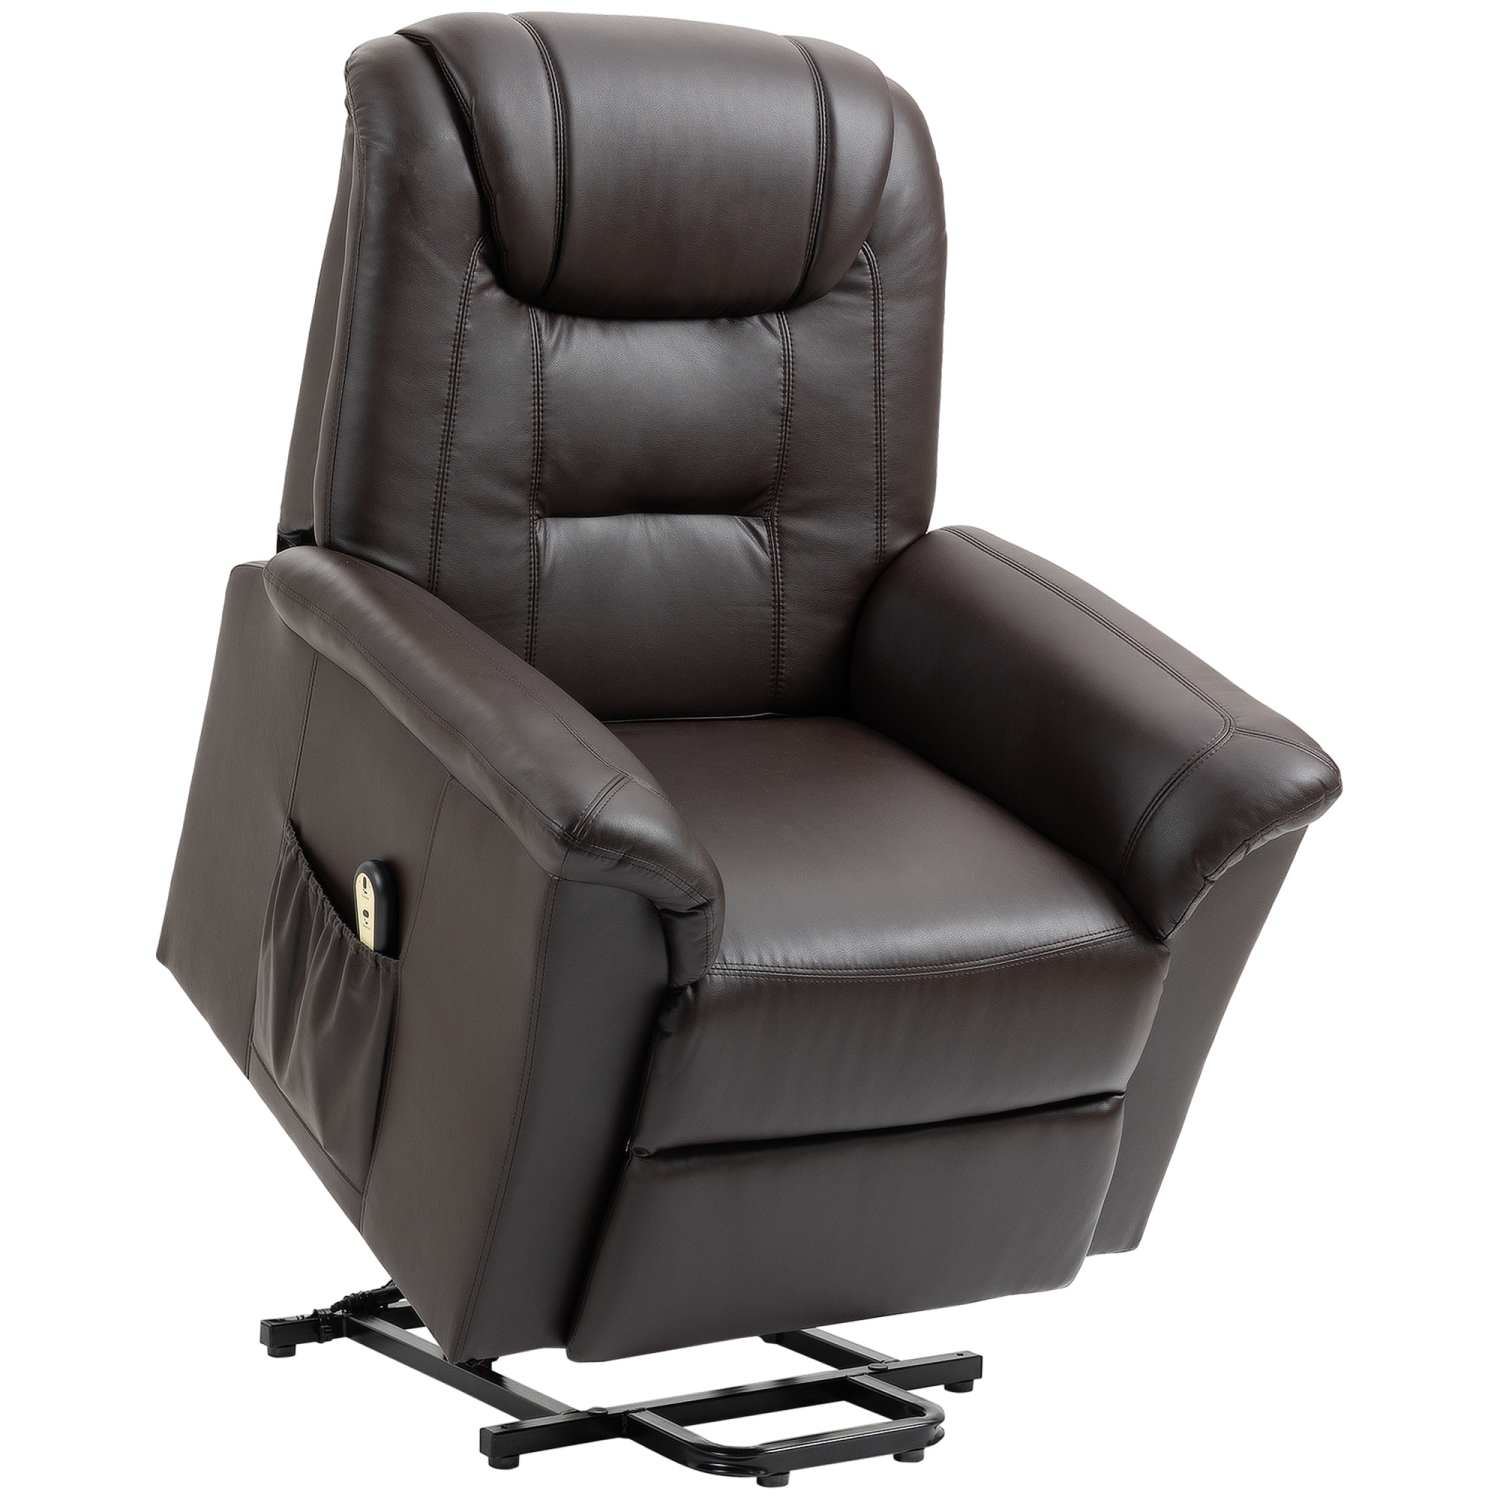 HOMCOM Electric Power Lift Chair for Elderly, PU Leather Recliner Sofa with Footrest and Remote Control for Living Room, Brown